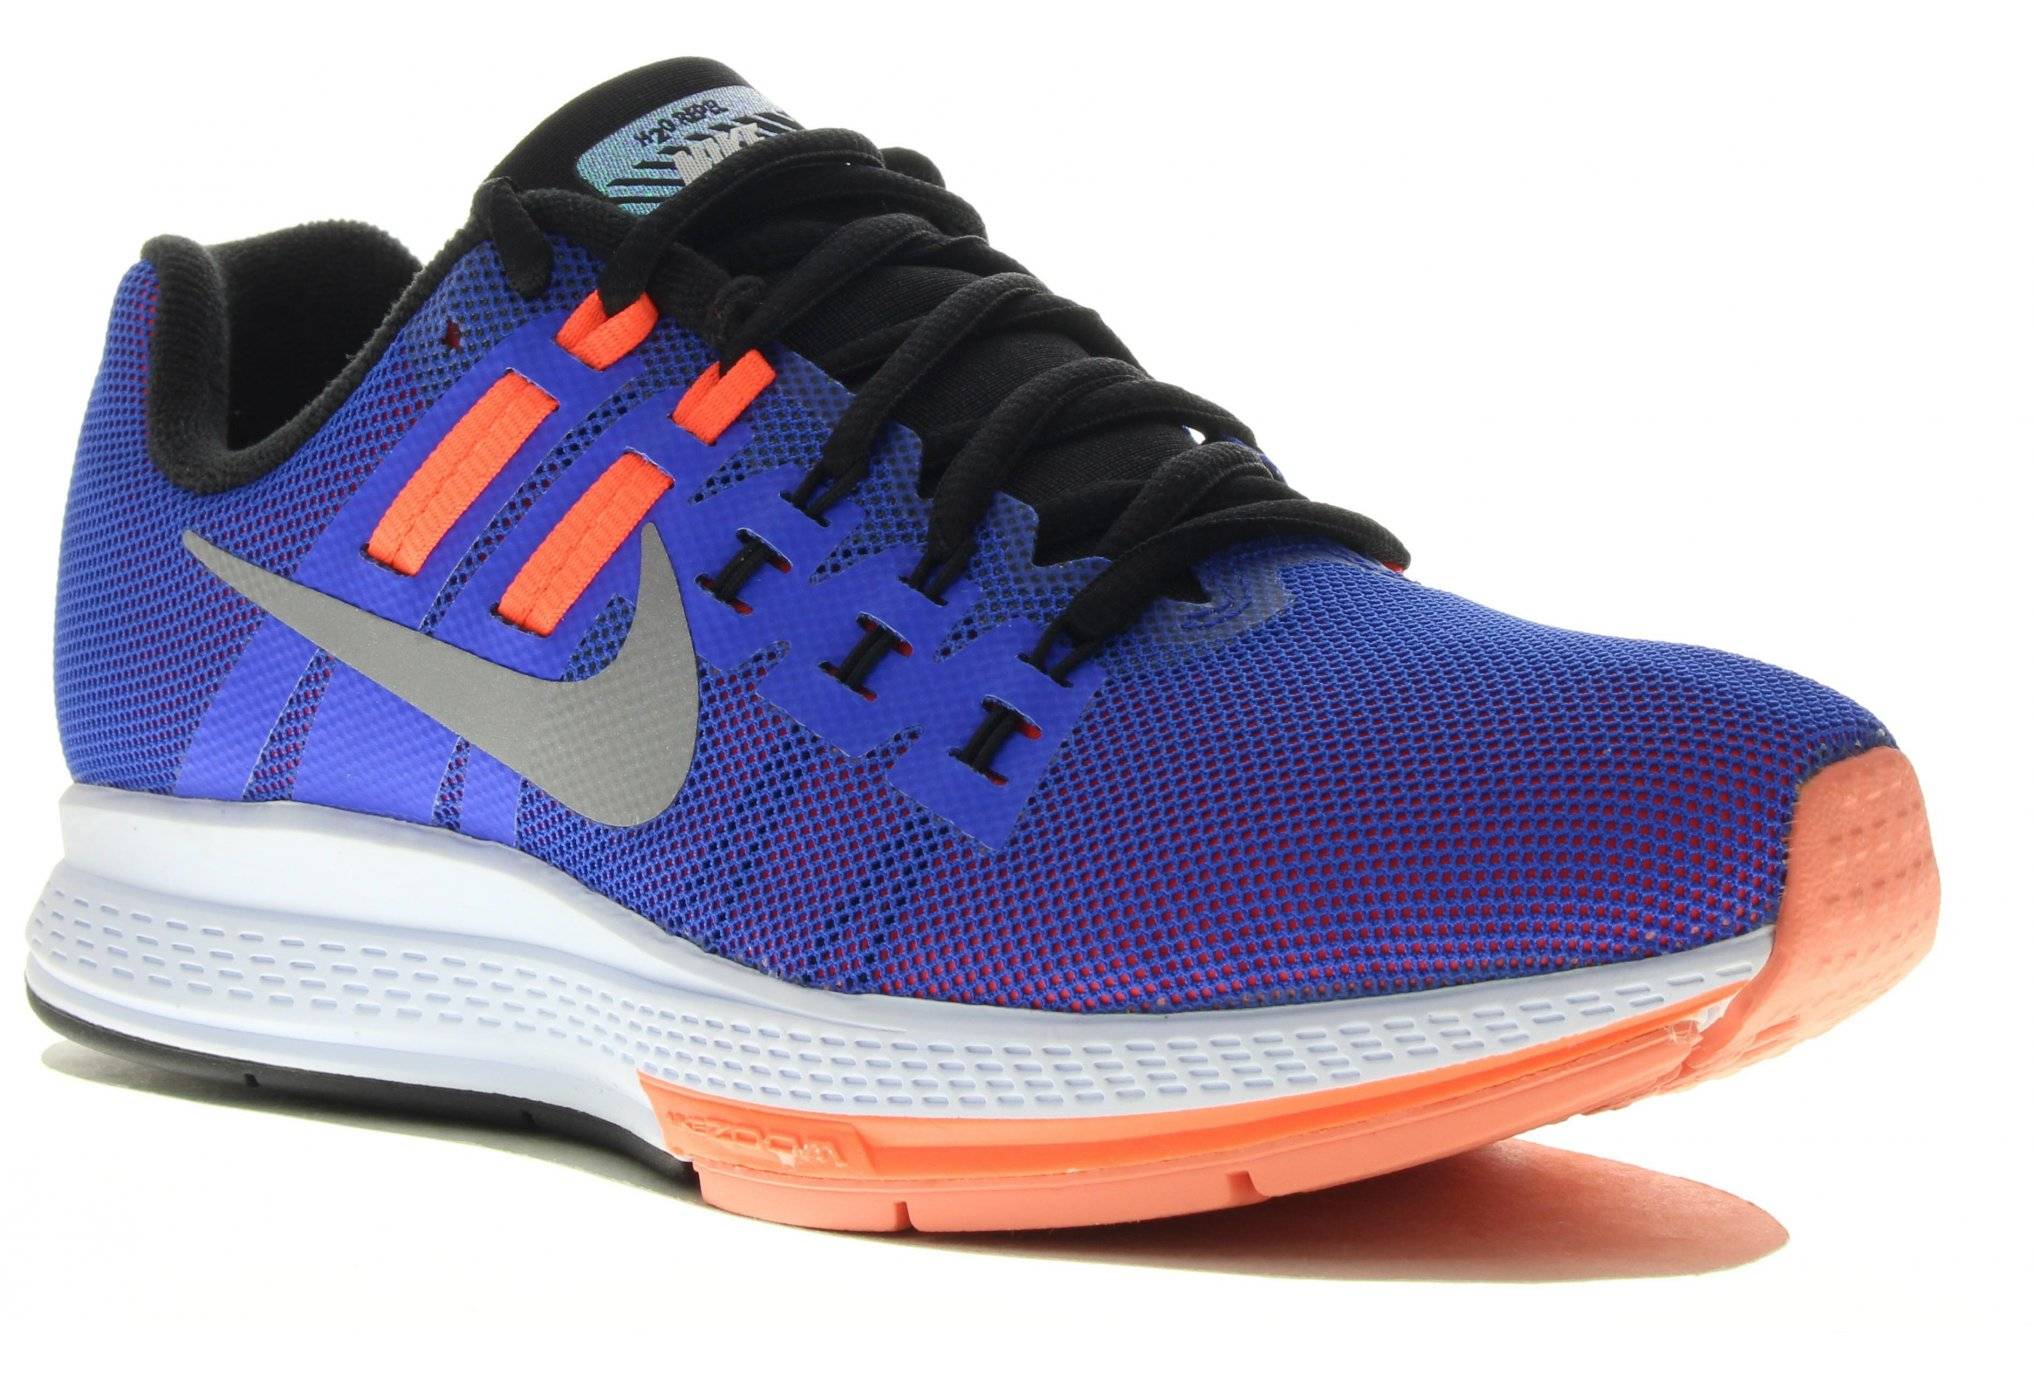 Nike Air Zoom Structure 19 Flash W 